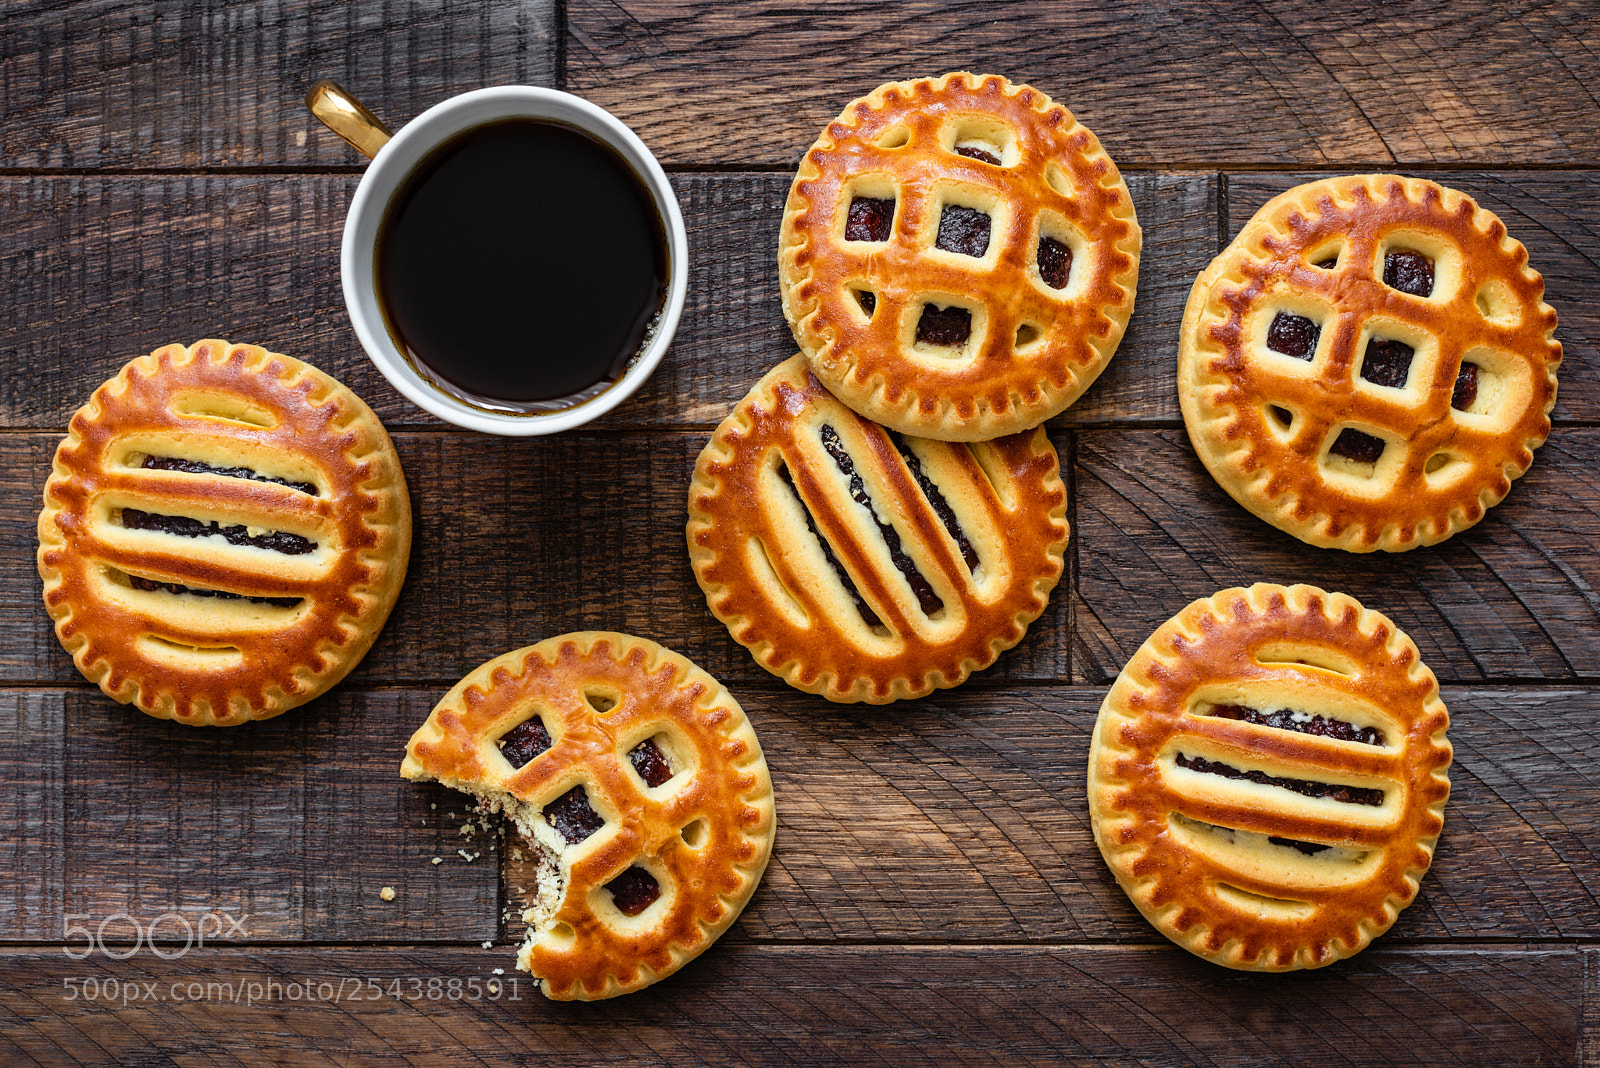 Nikon D810 sample photo. Cookies with jam and photography